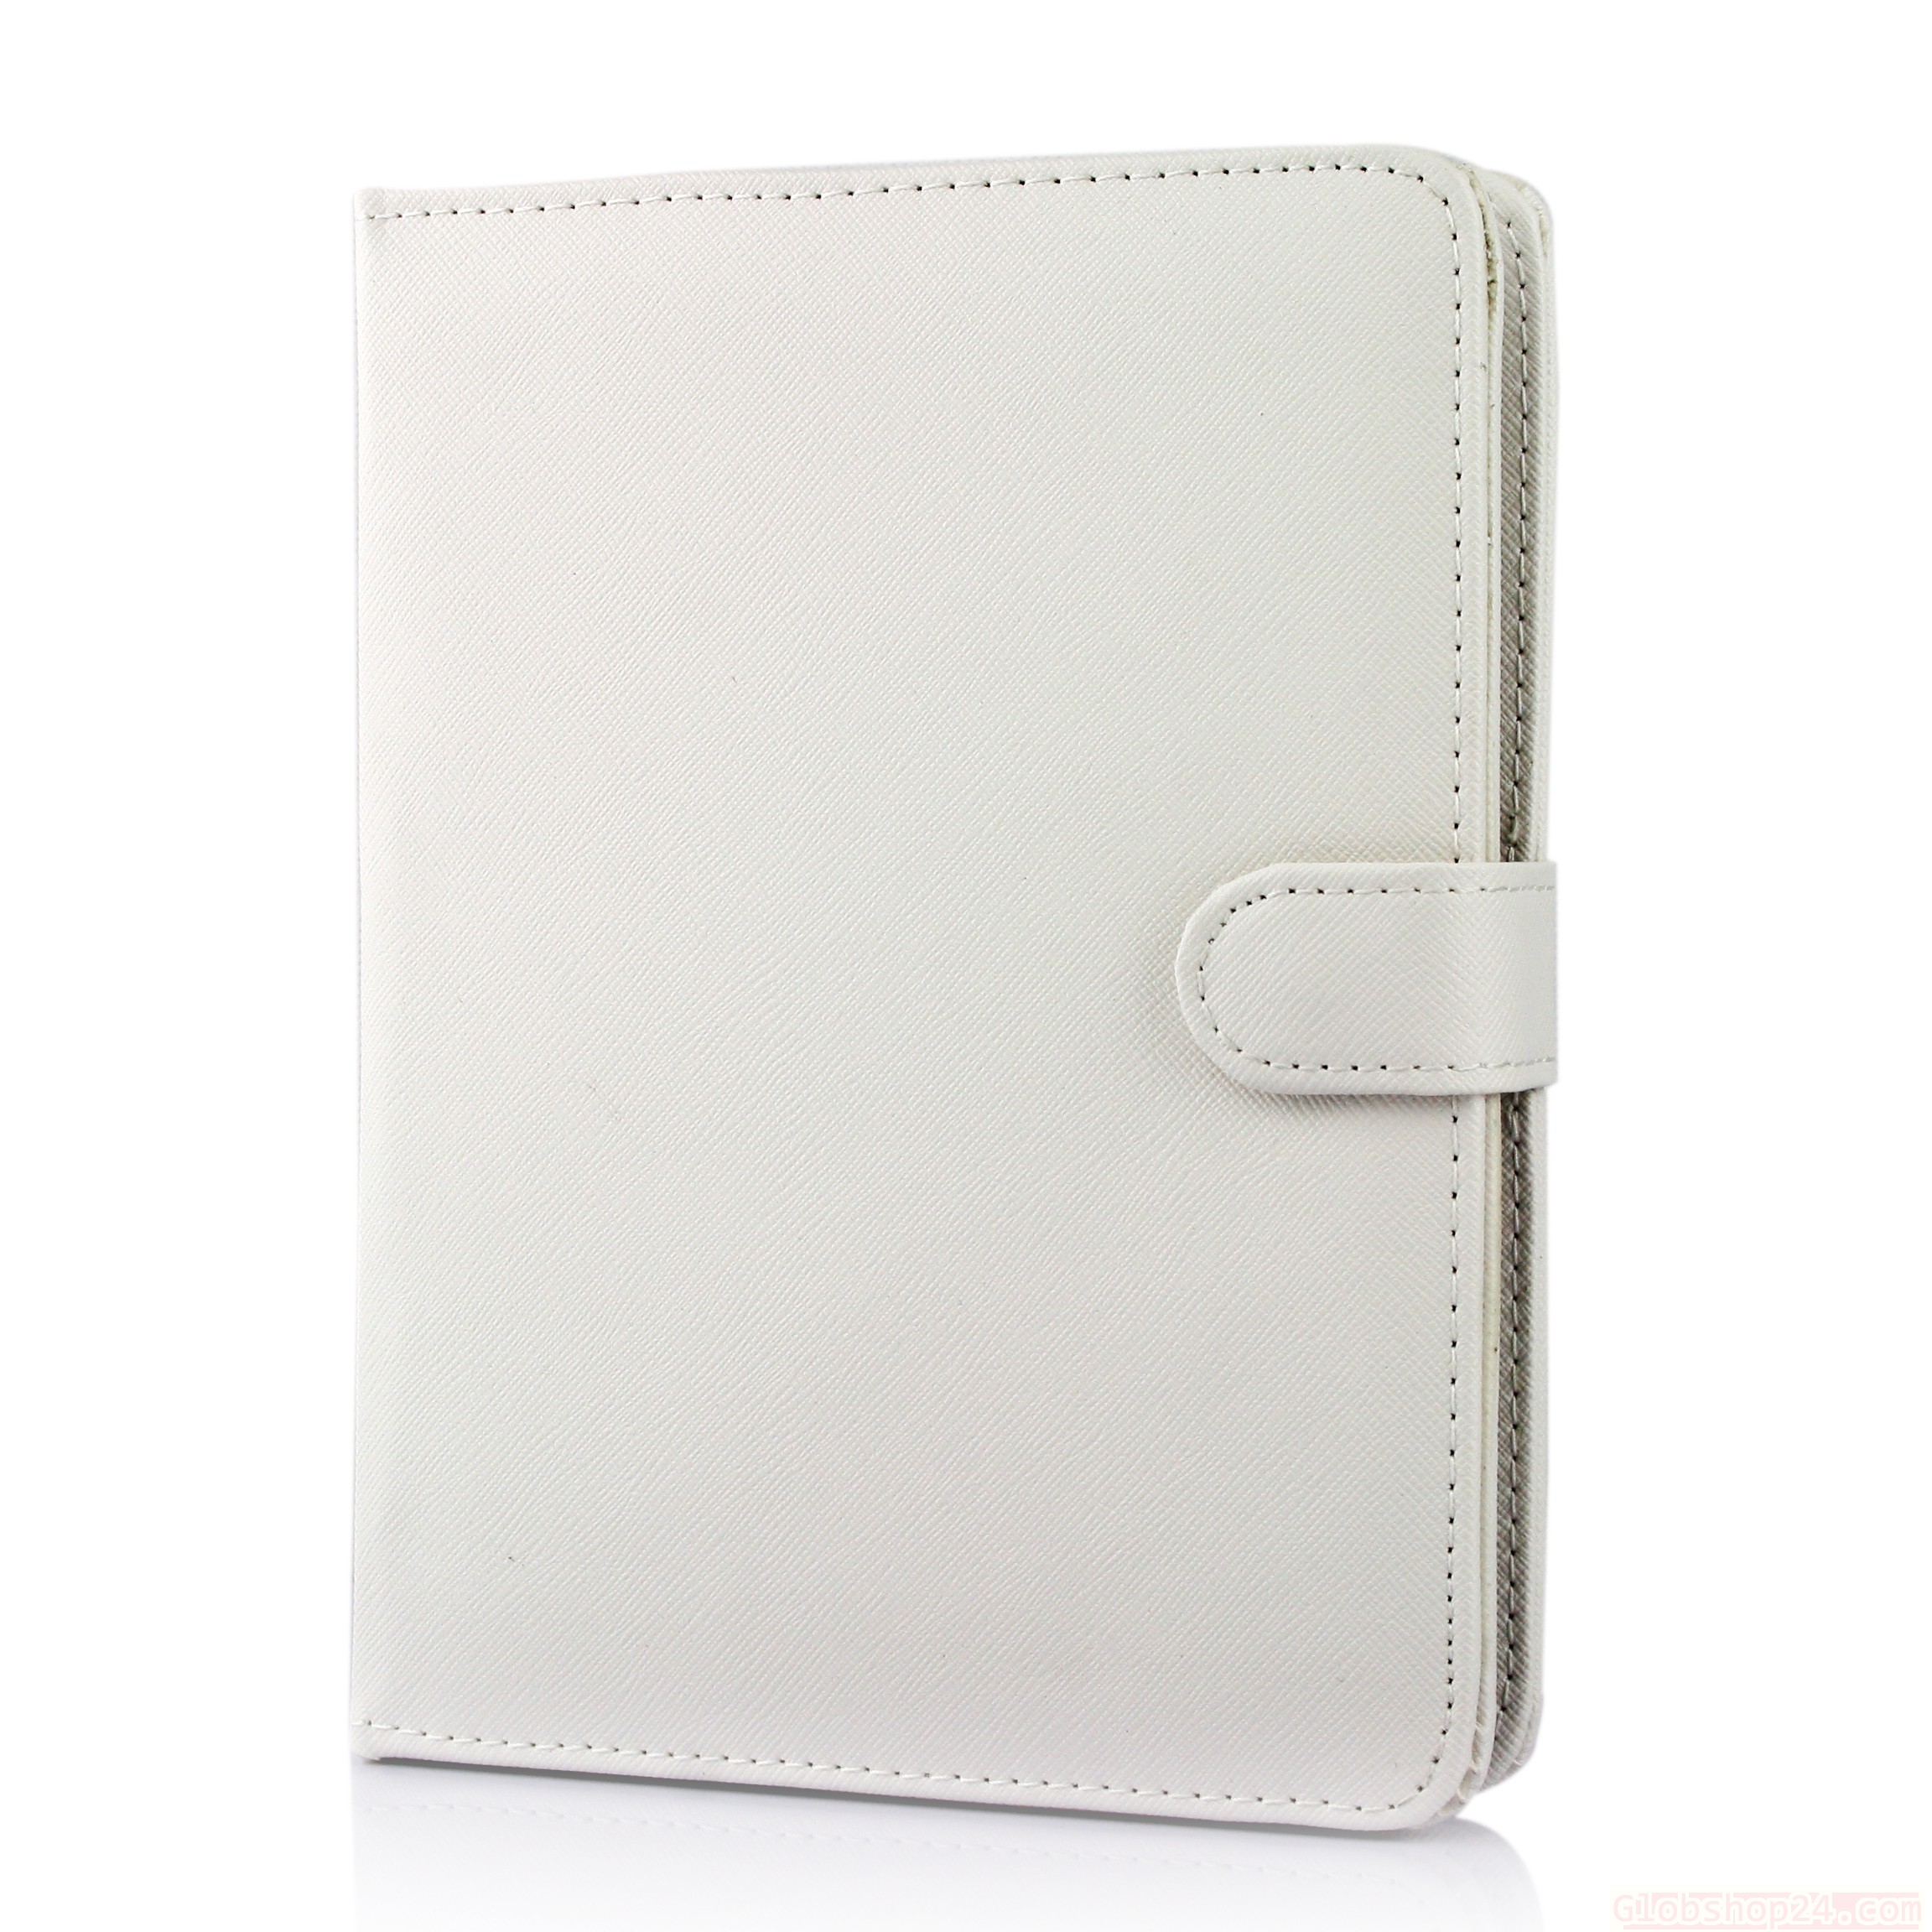 Base Universal Leather Pouch For 7-8" Tablets - White